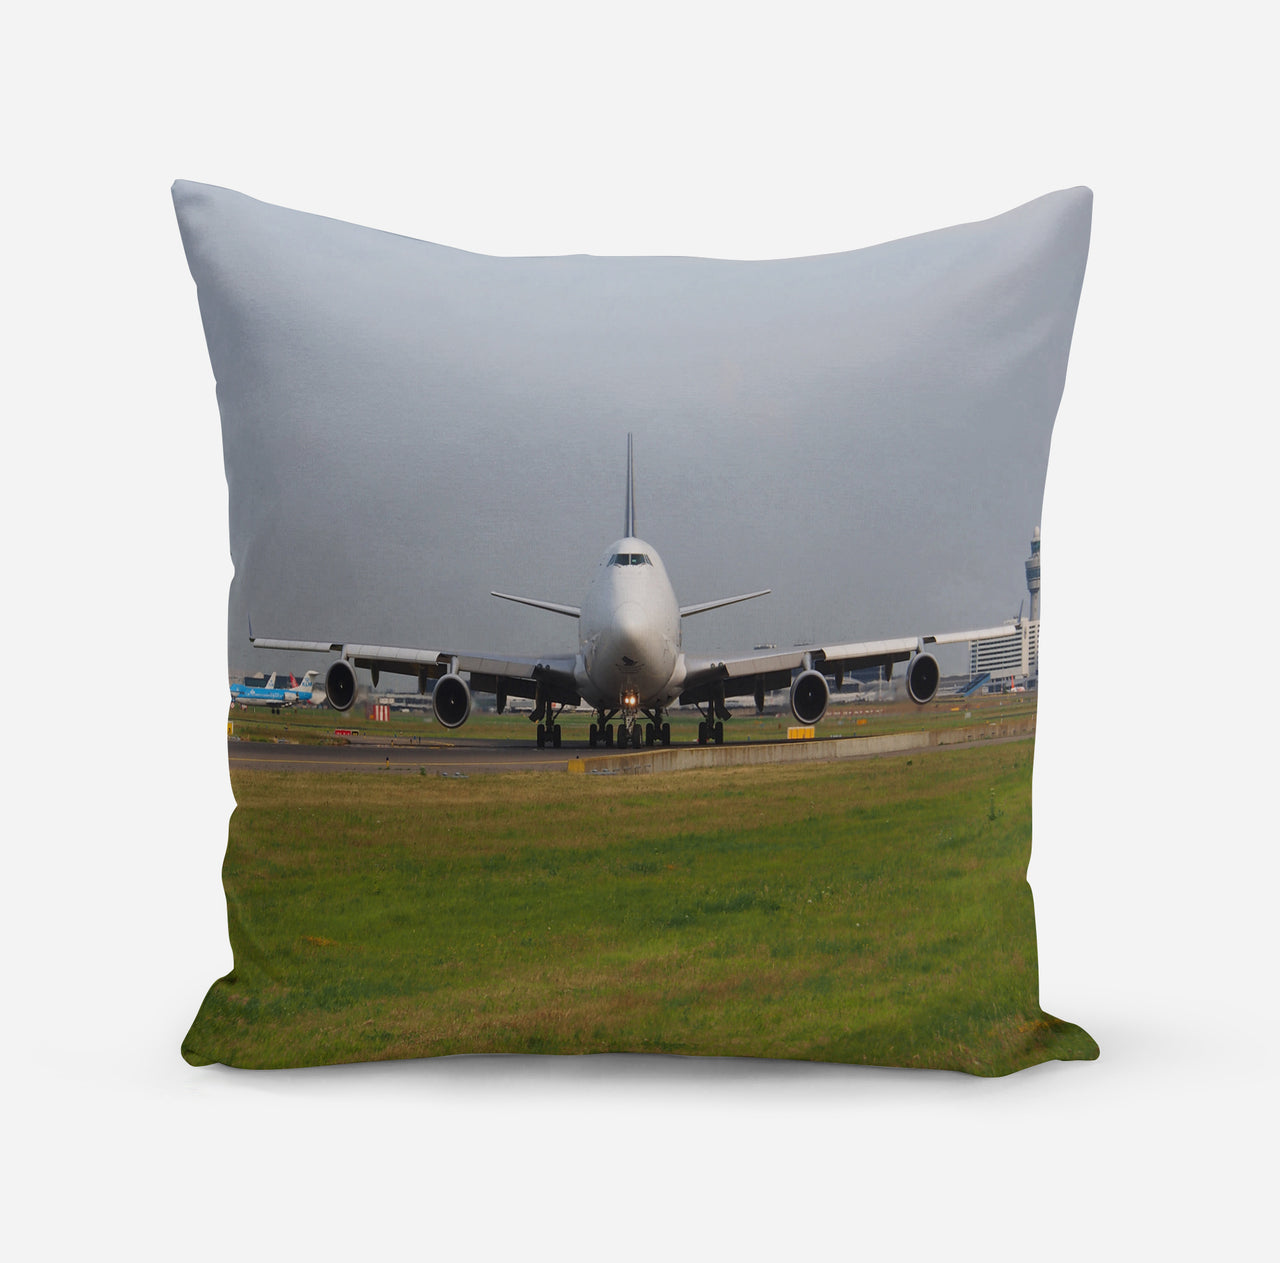 Face to Face with Boeing 747 Designed Pillows